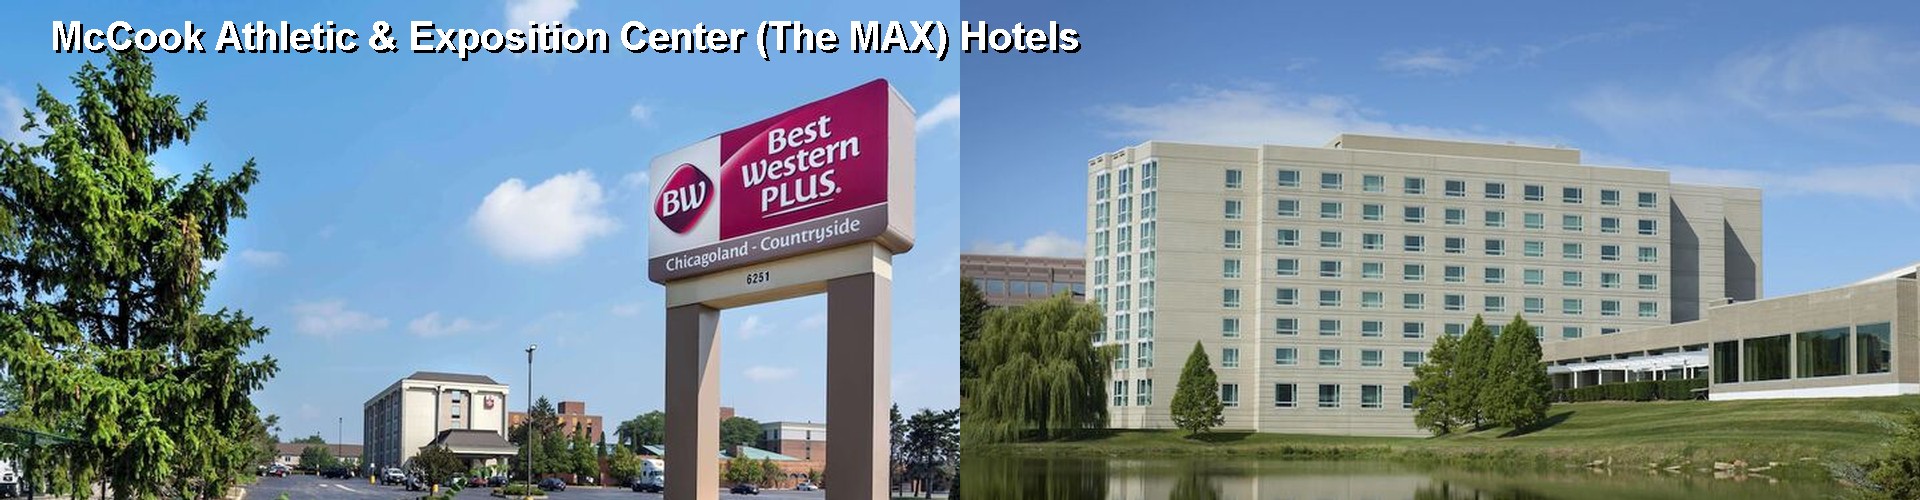 5 Best Hotels near McCook Athletic & Exposition Center (The MAX)